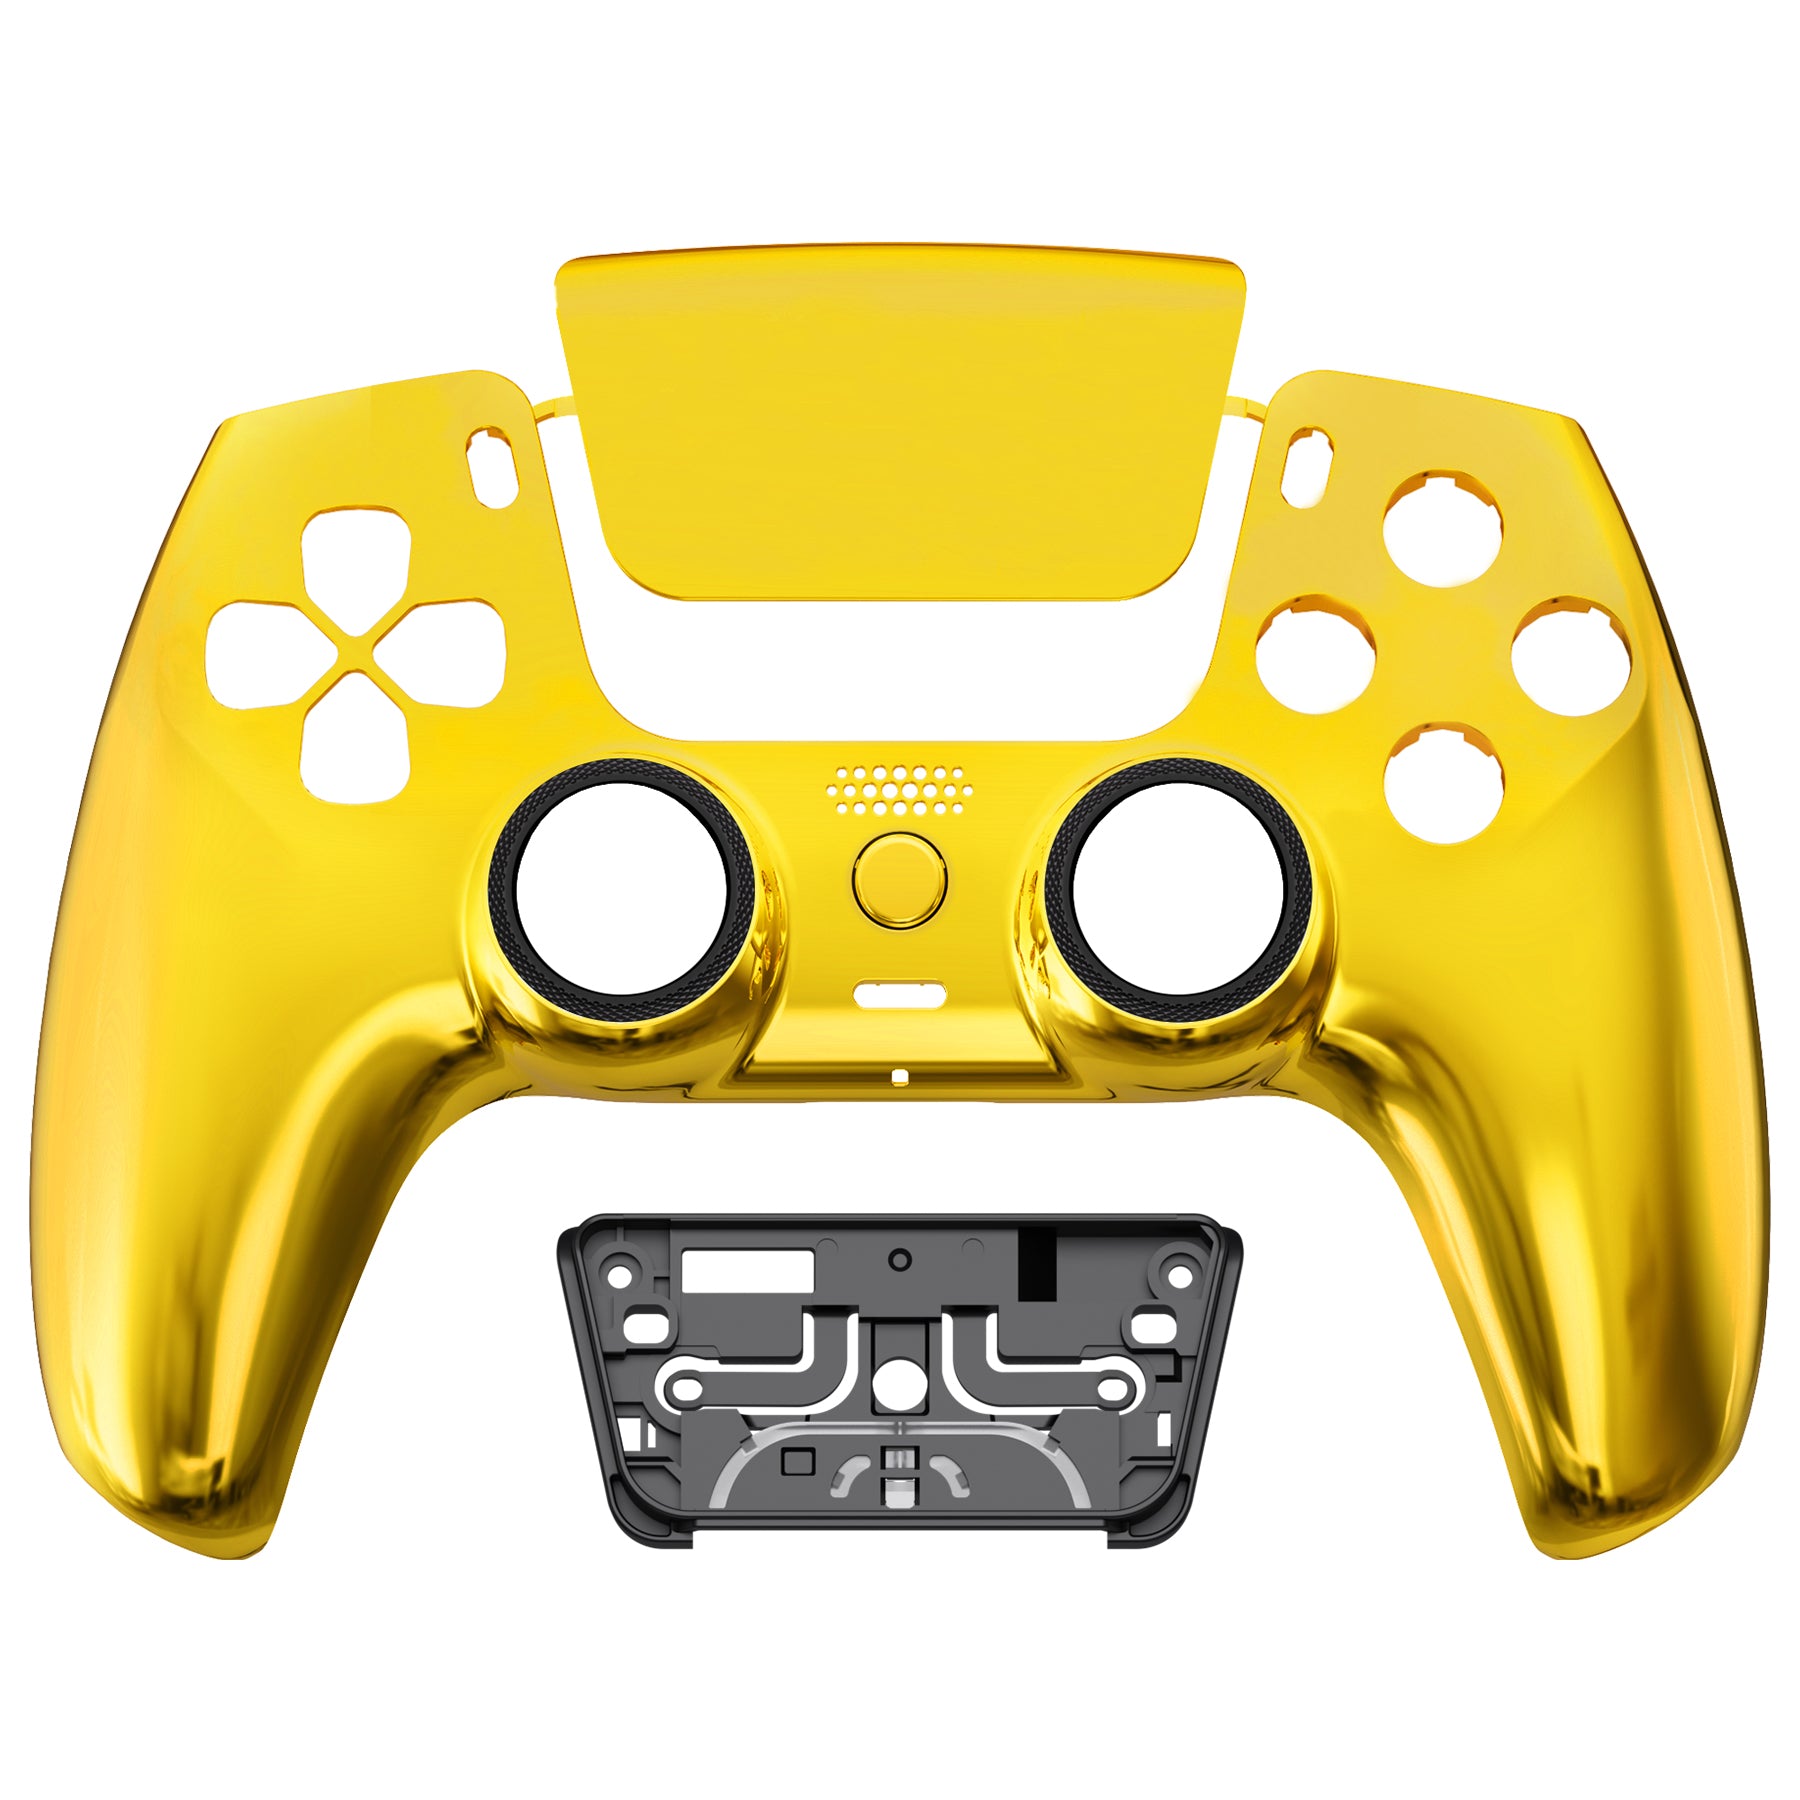 Zm_Customs — Brand New Xbox360 Controller/shell